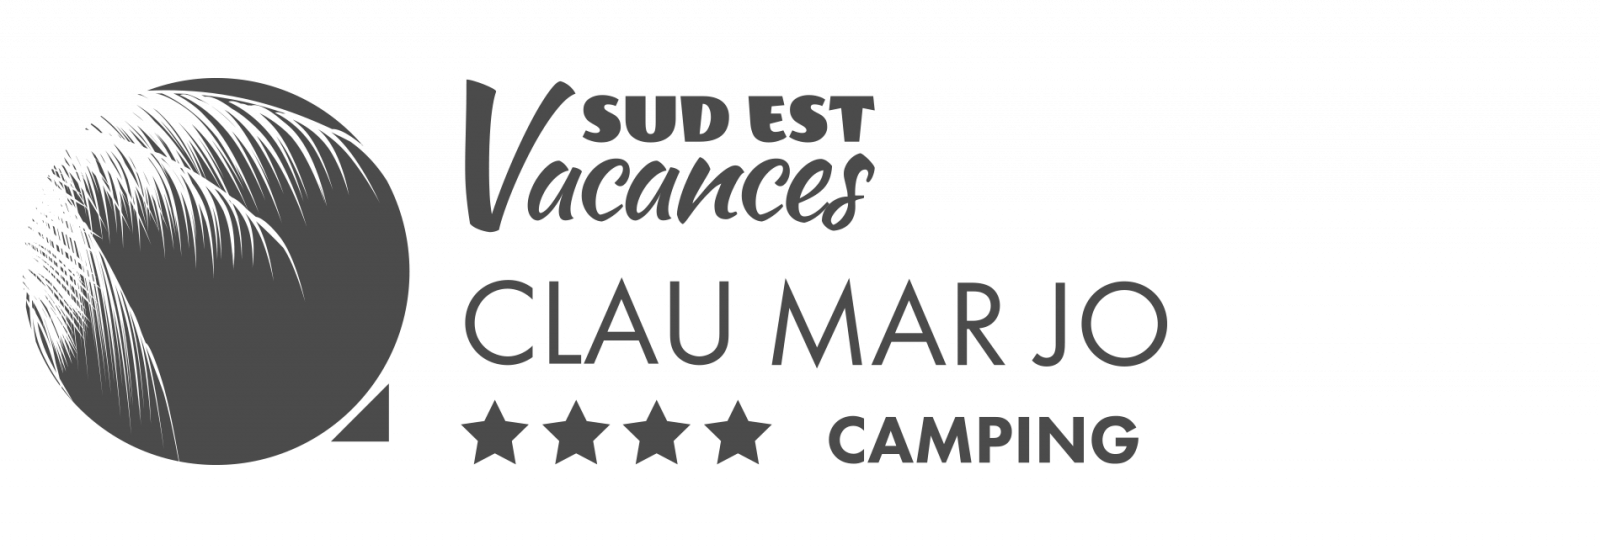 Logo Camping Clau Mar Jo Black - Black-and-white (1600x548), Png Download